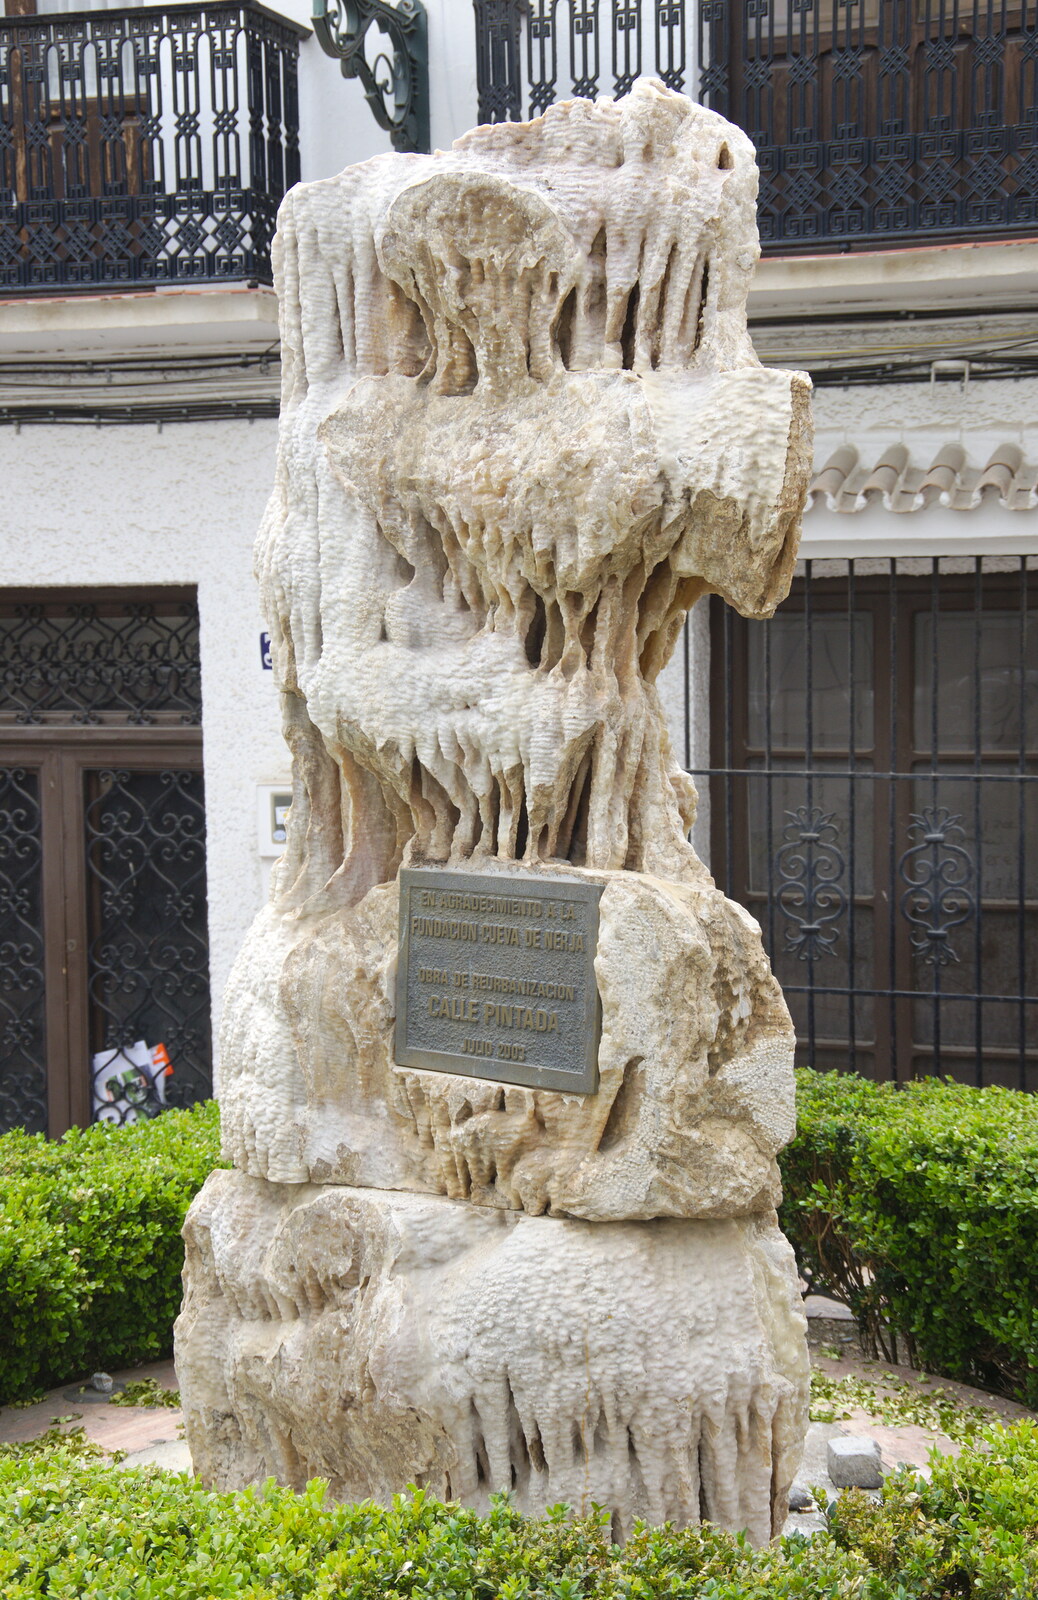 A chunk of stalactite 'waterfall' on the street from Torrecilla Beach and the Nerja Museum, Andalusia, Spain - 17th April 2019